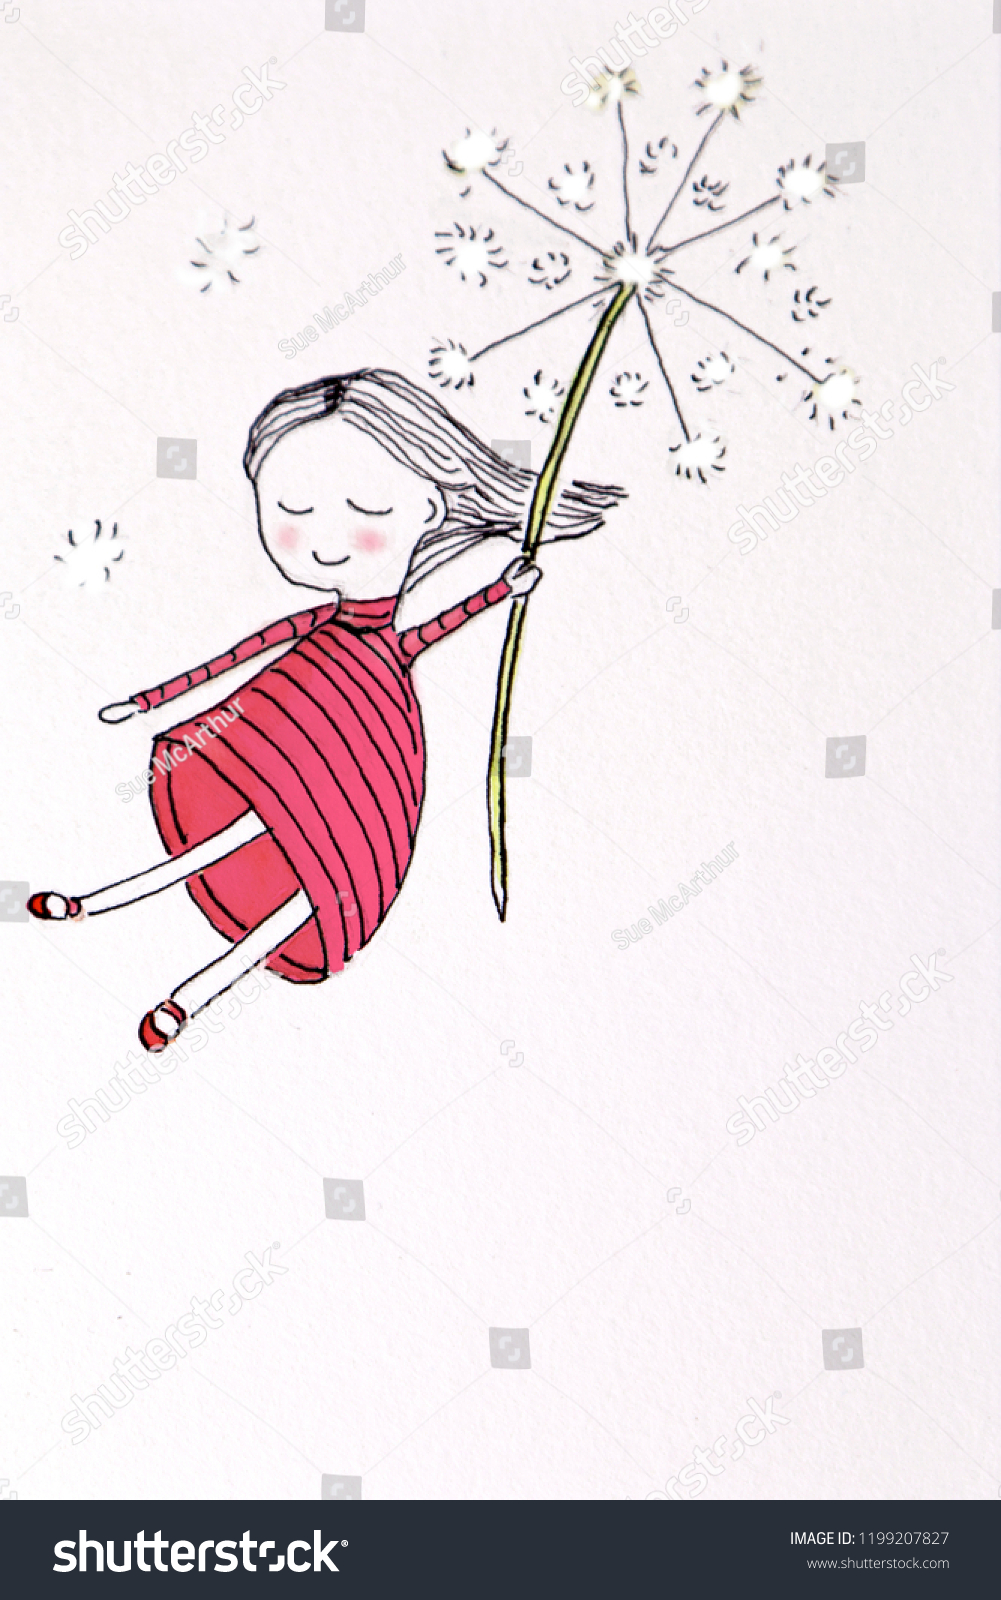 7,029 Whimsical girls Images, Stock Photos & Vectors | Shutterstock